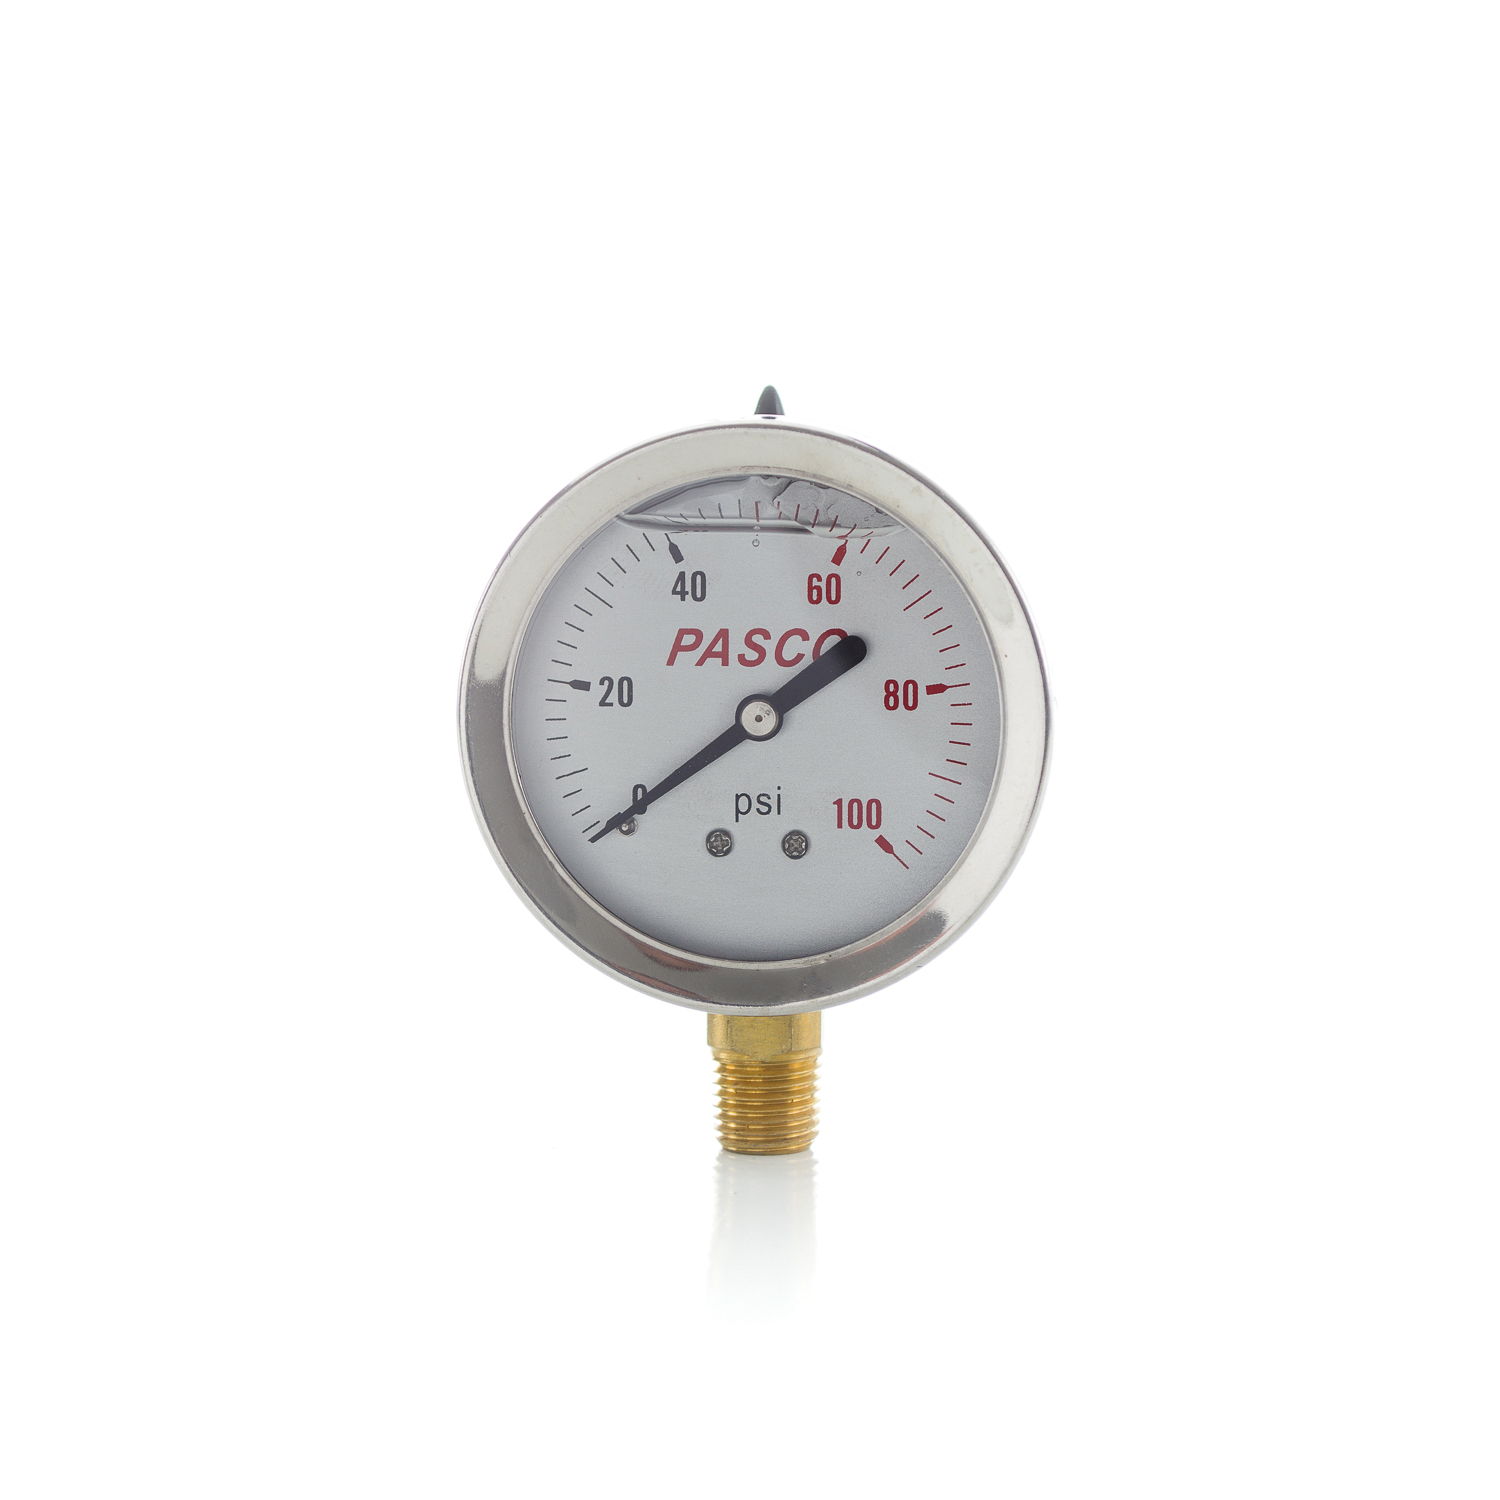 PASCO 1774 Pressure Gauge, 0 to 100 psi, 1/4 in MNPT Connection, 2-1/2 in Dial, +/- 3-2-3 %